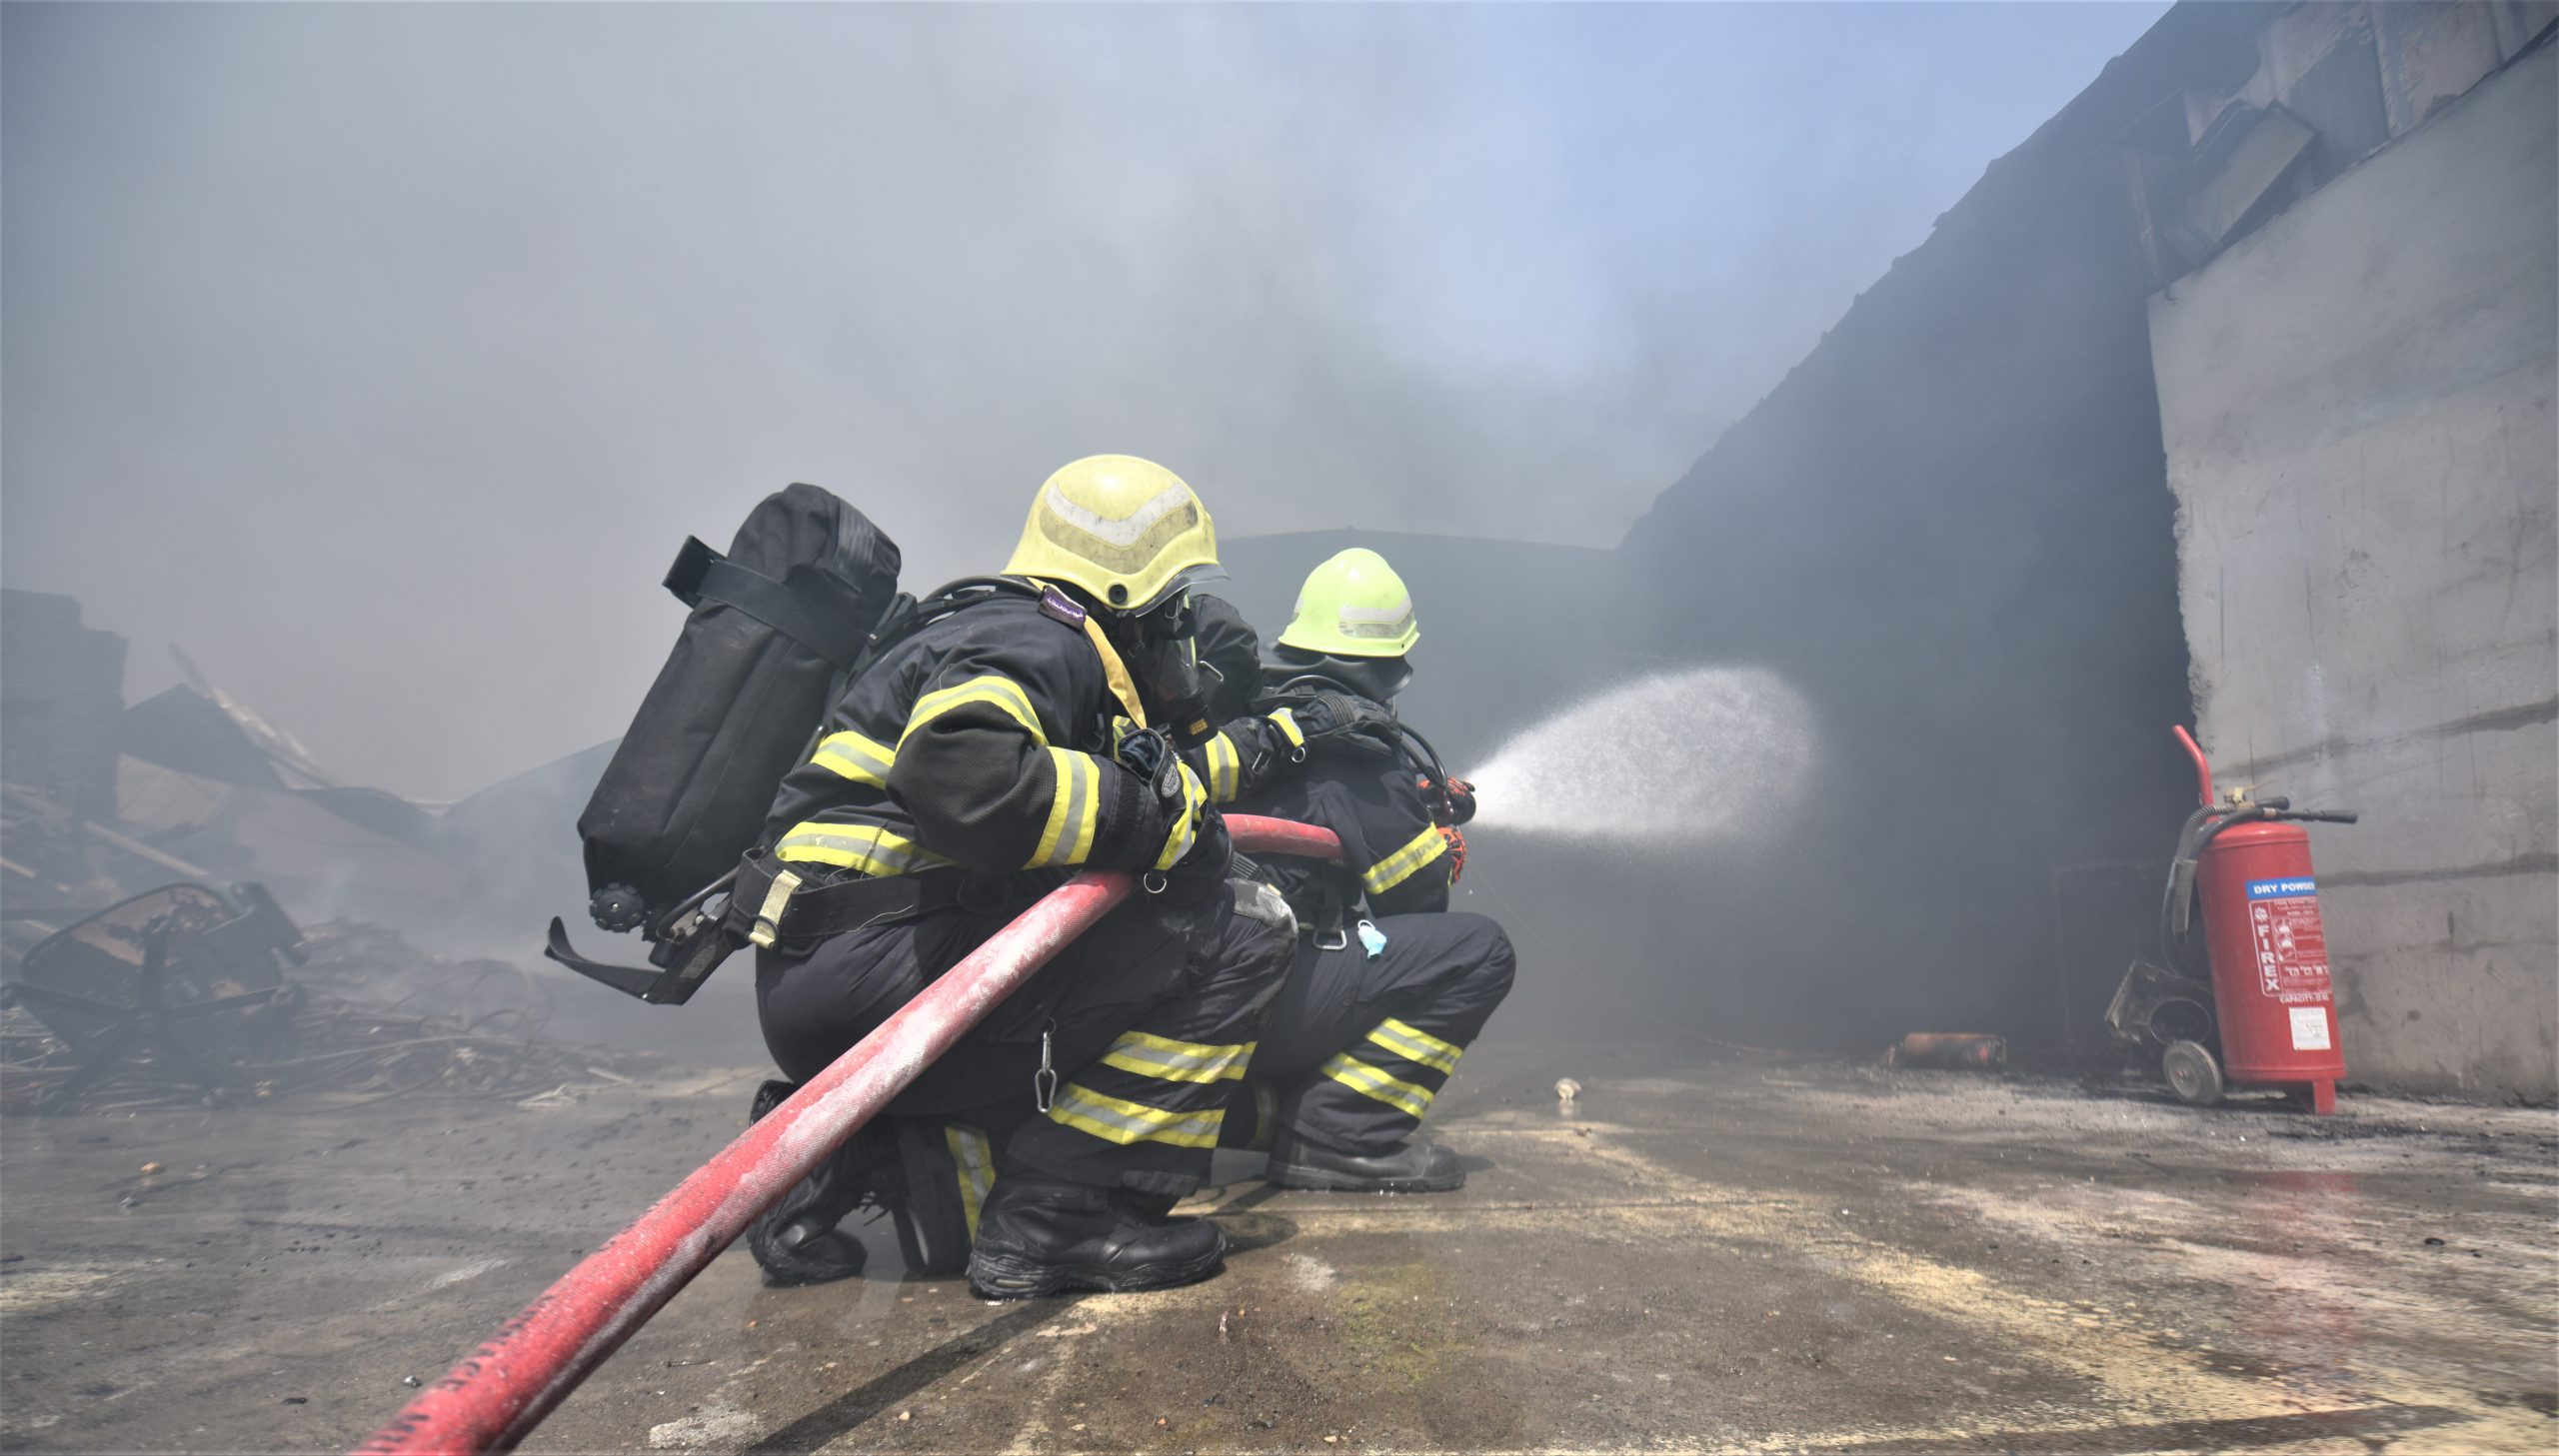 PACDA issues advice to avoid summer fires